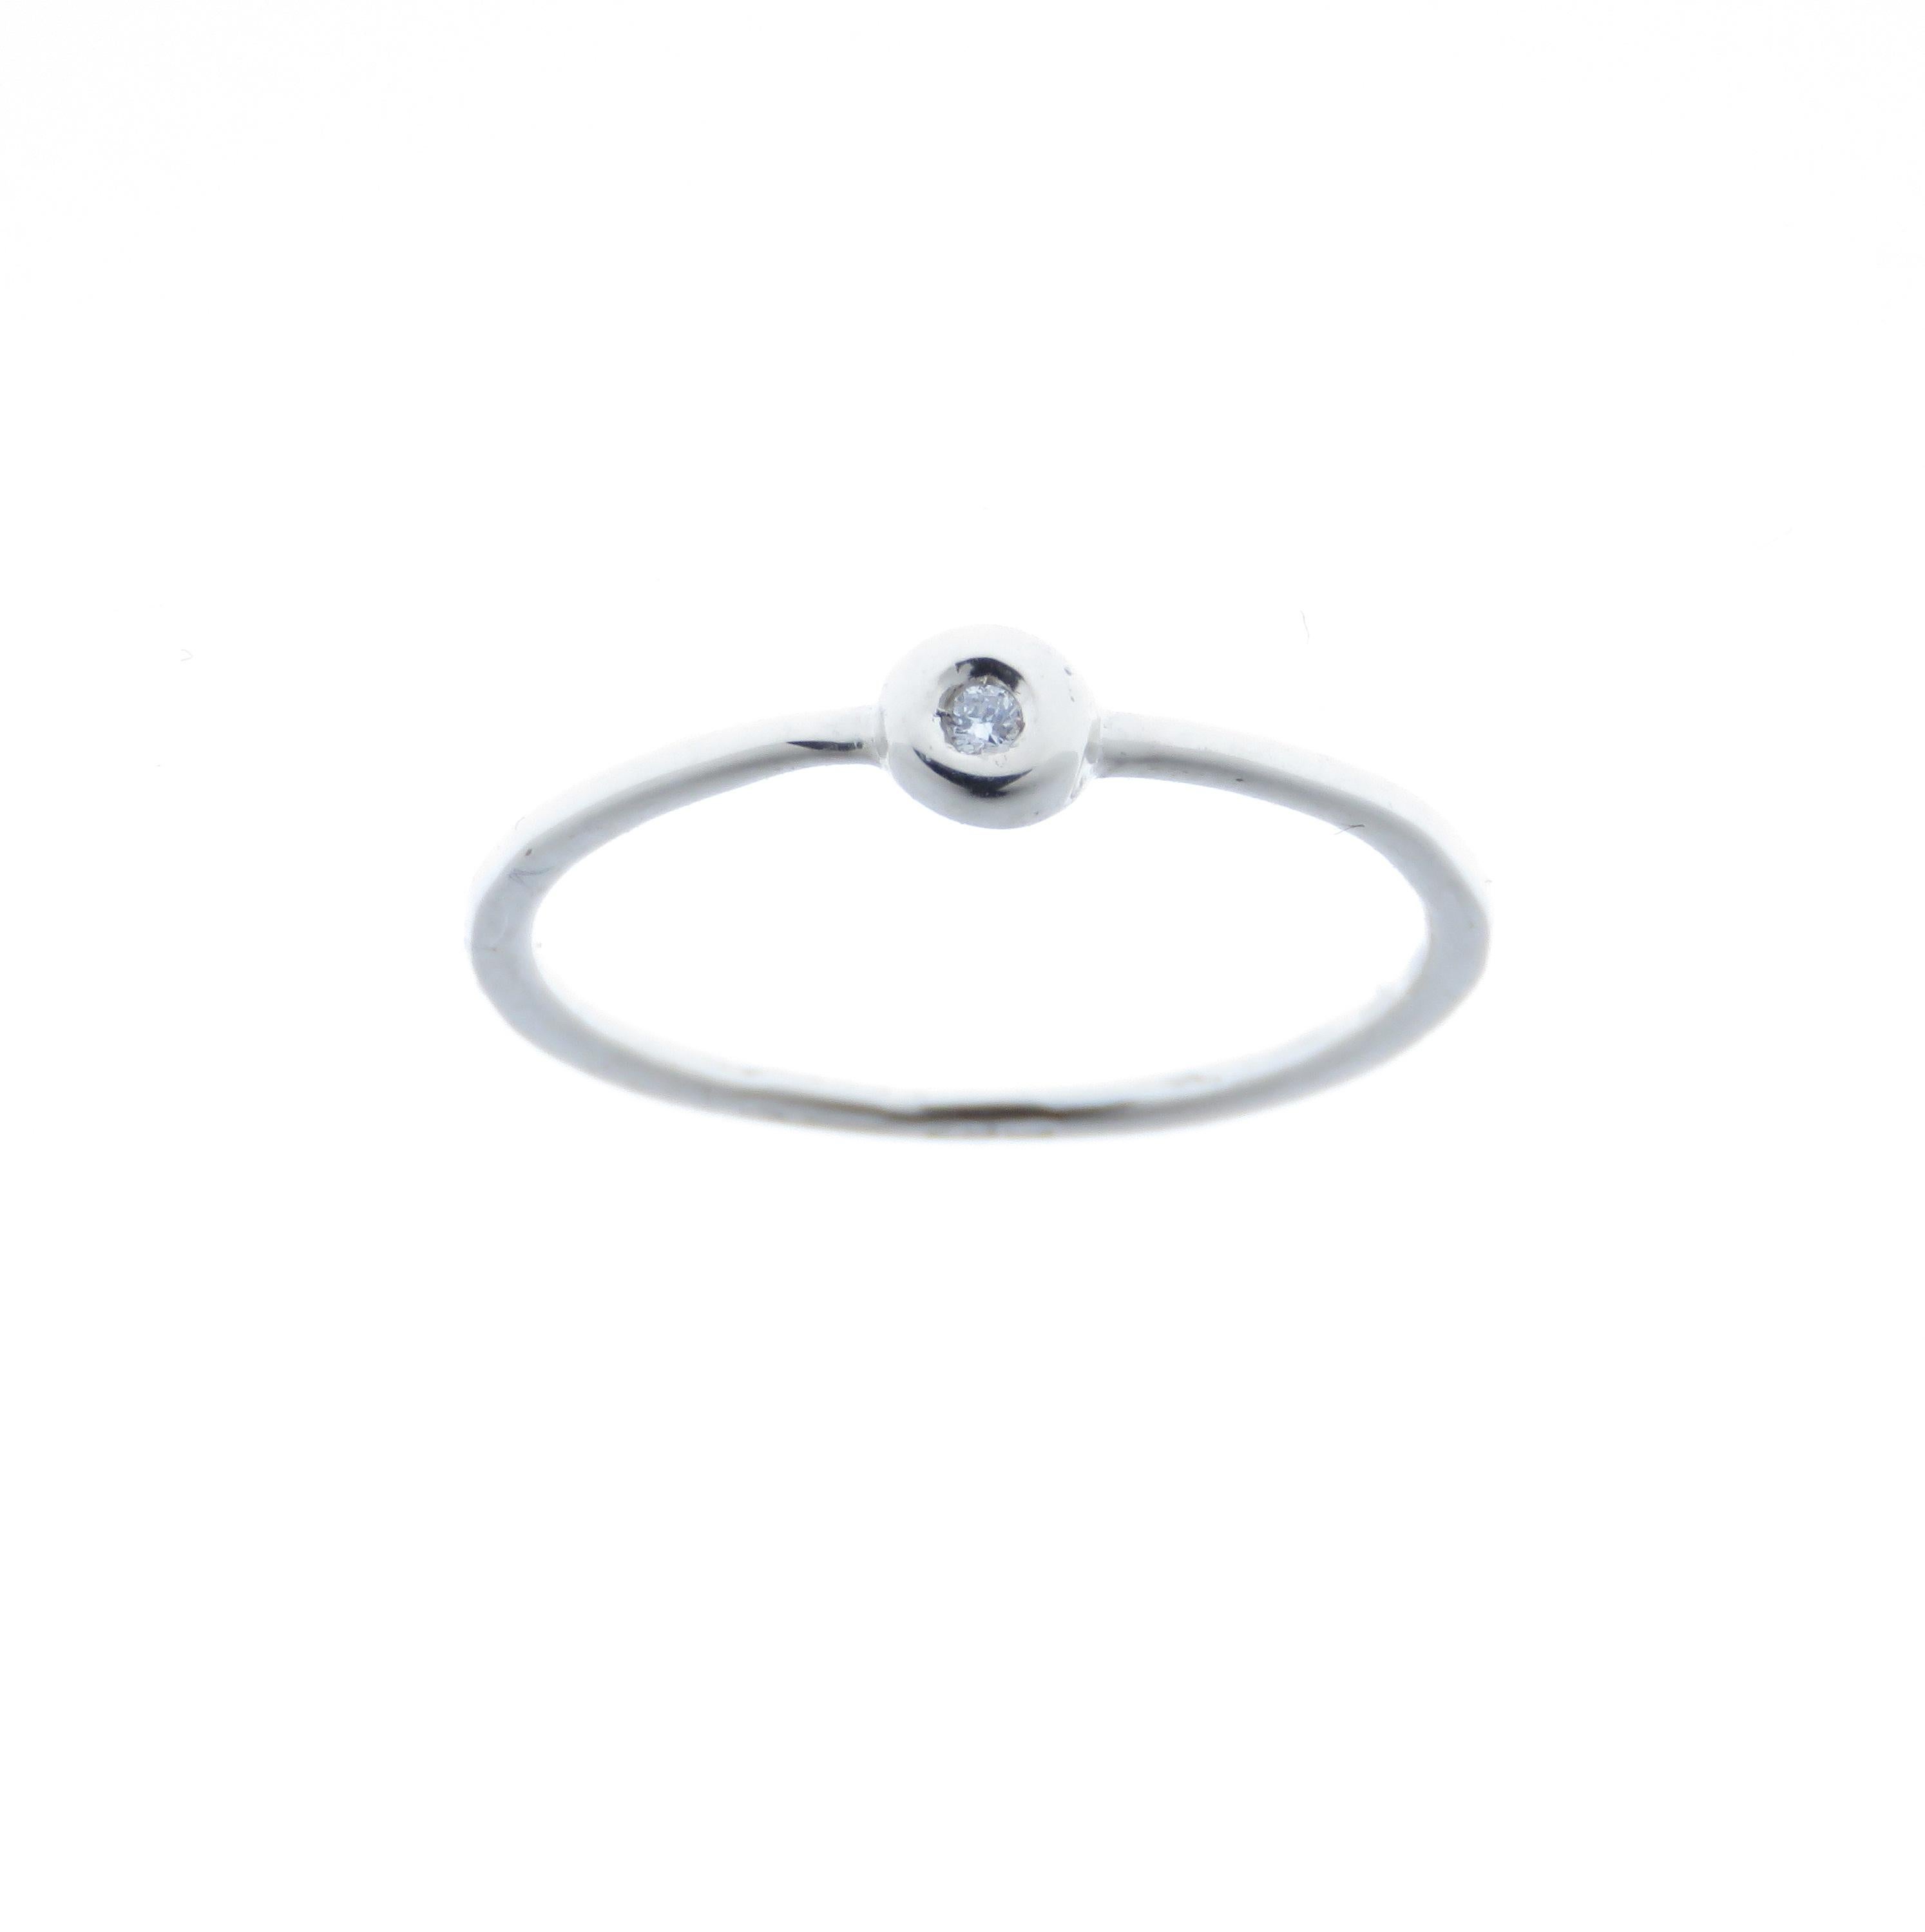 Round Cut Diamonds White Gold Stacking Ring Handcrafted in Italy by Botta Gioielli For Sale